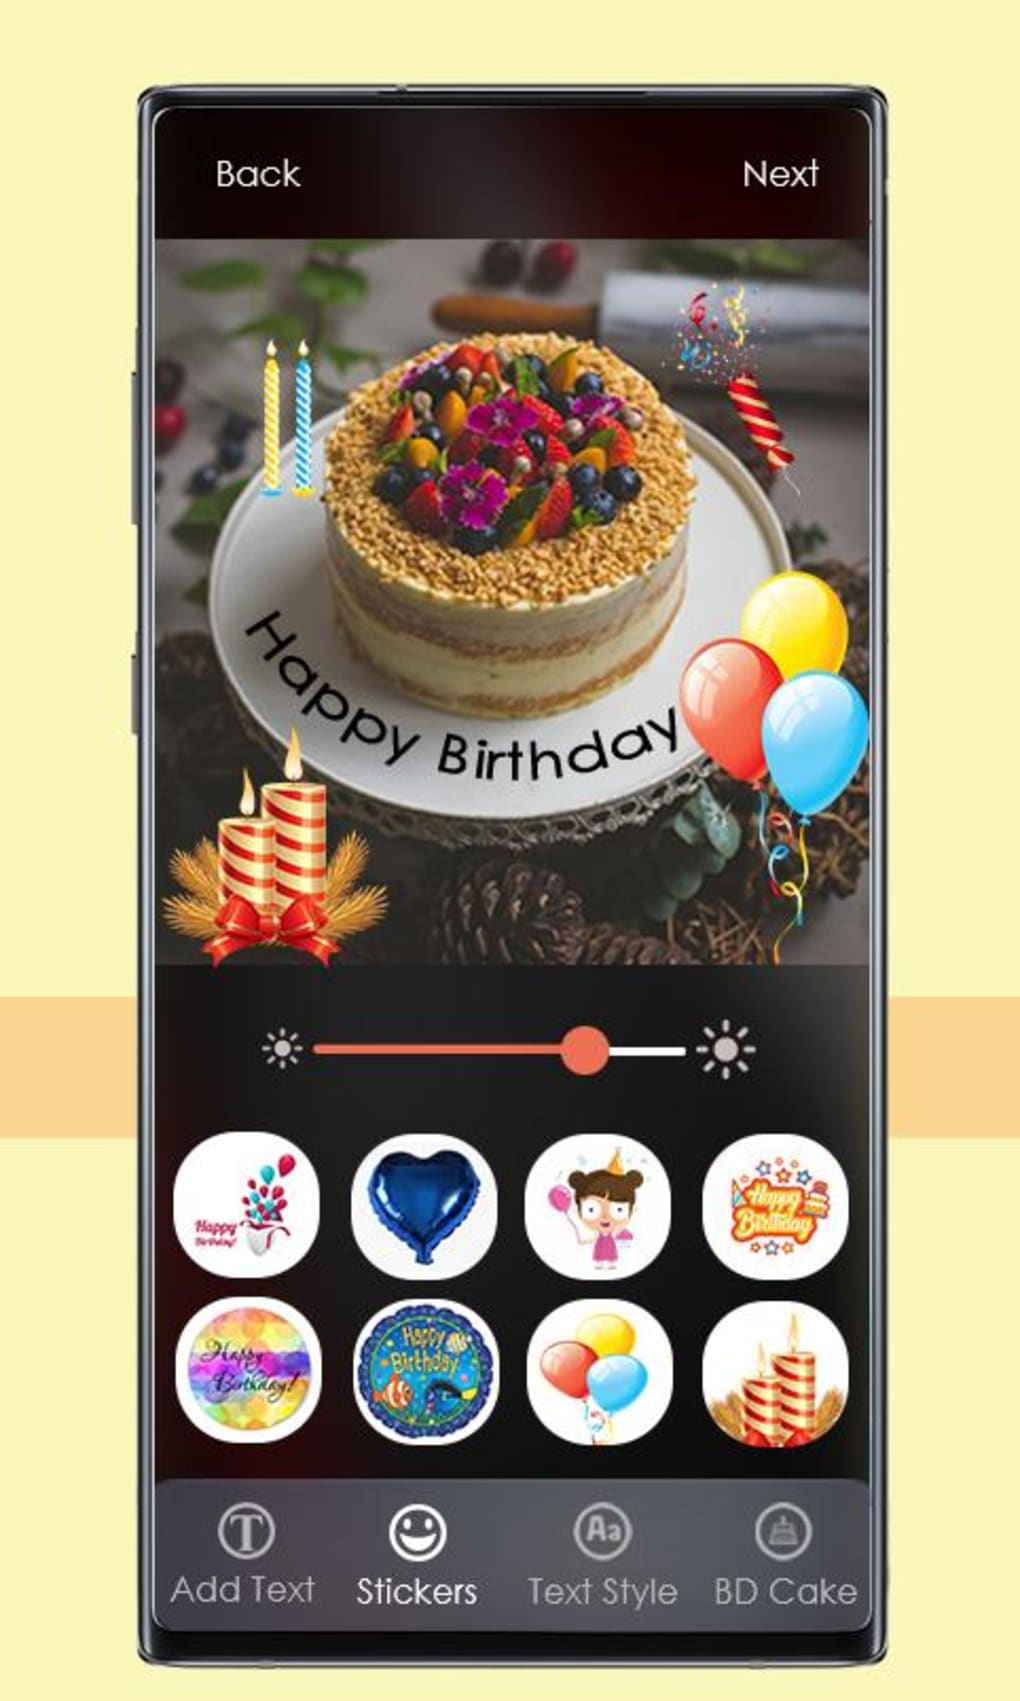 Happy Birthday Photo Cake - APK Download for Android | Aptoide